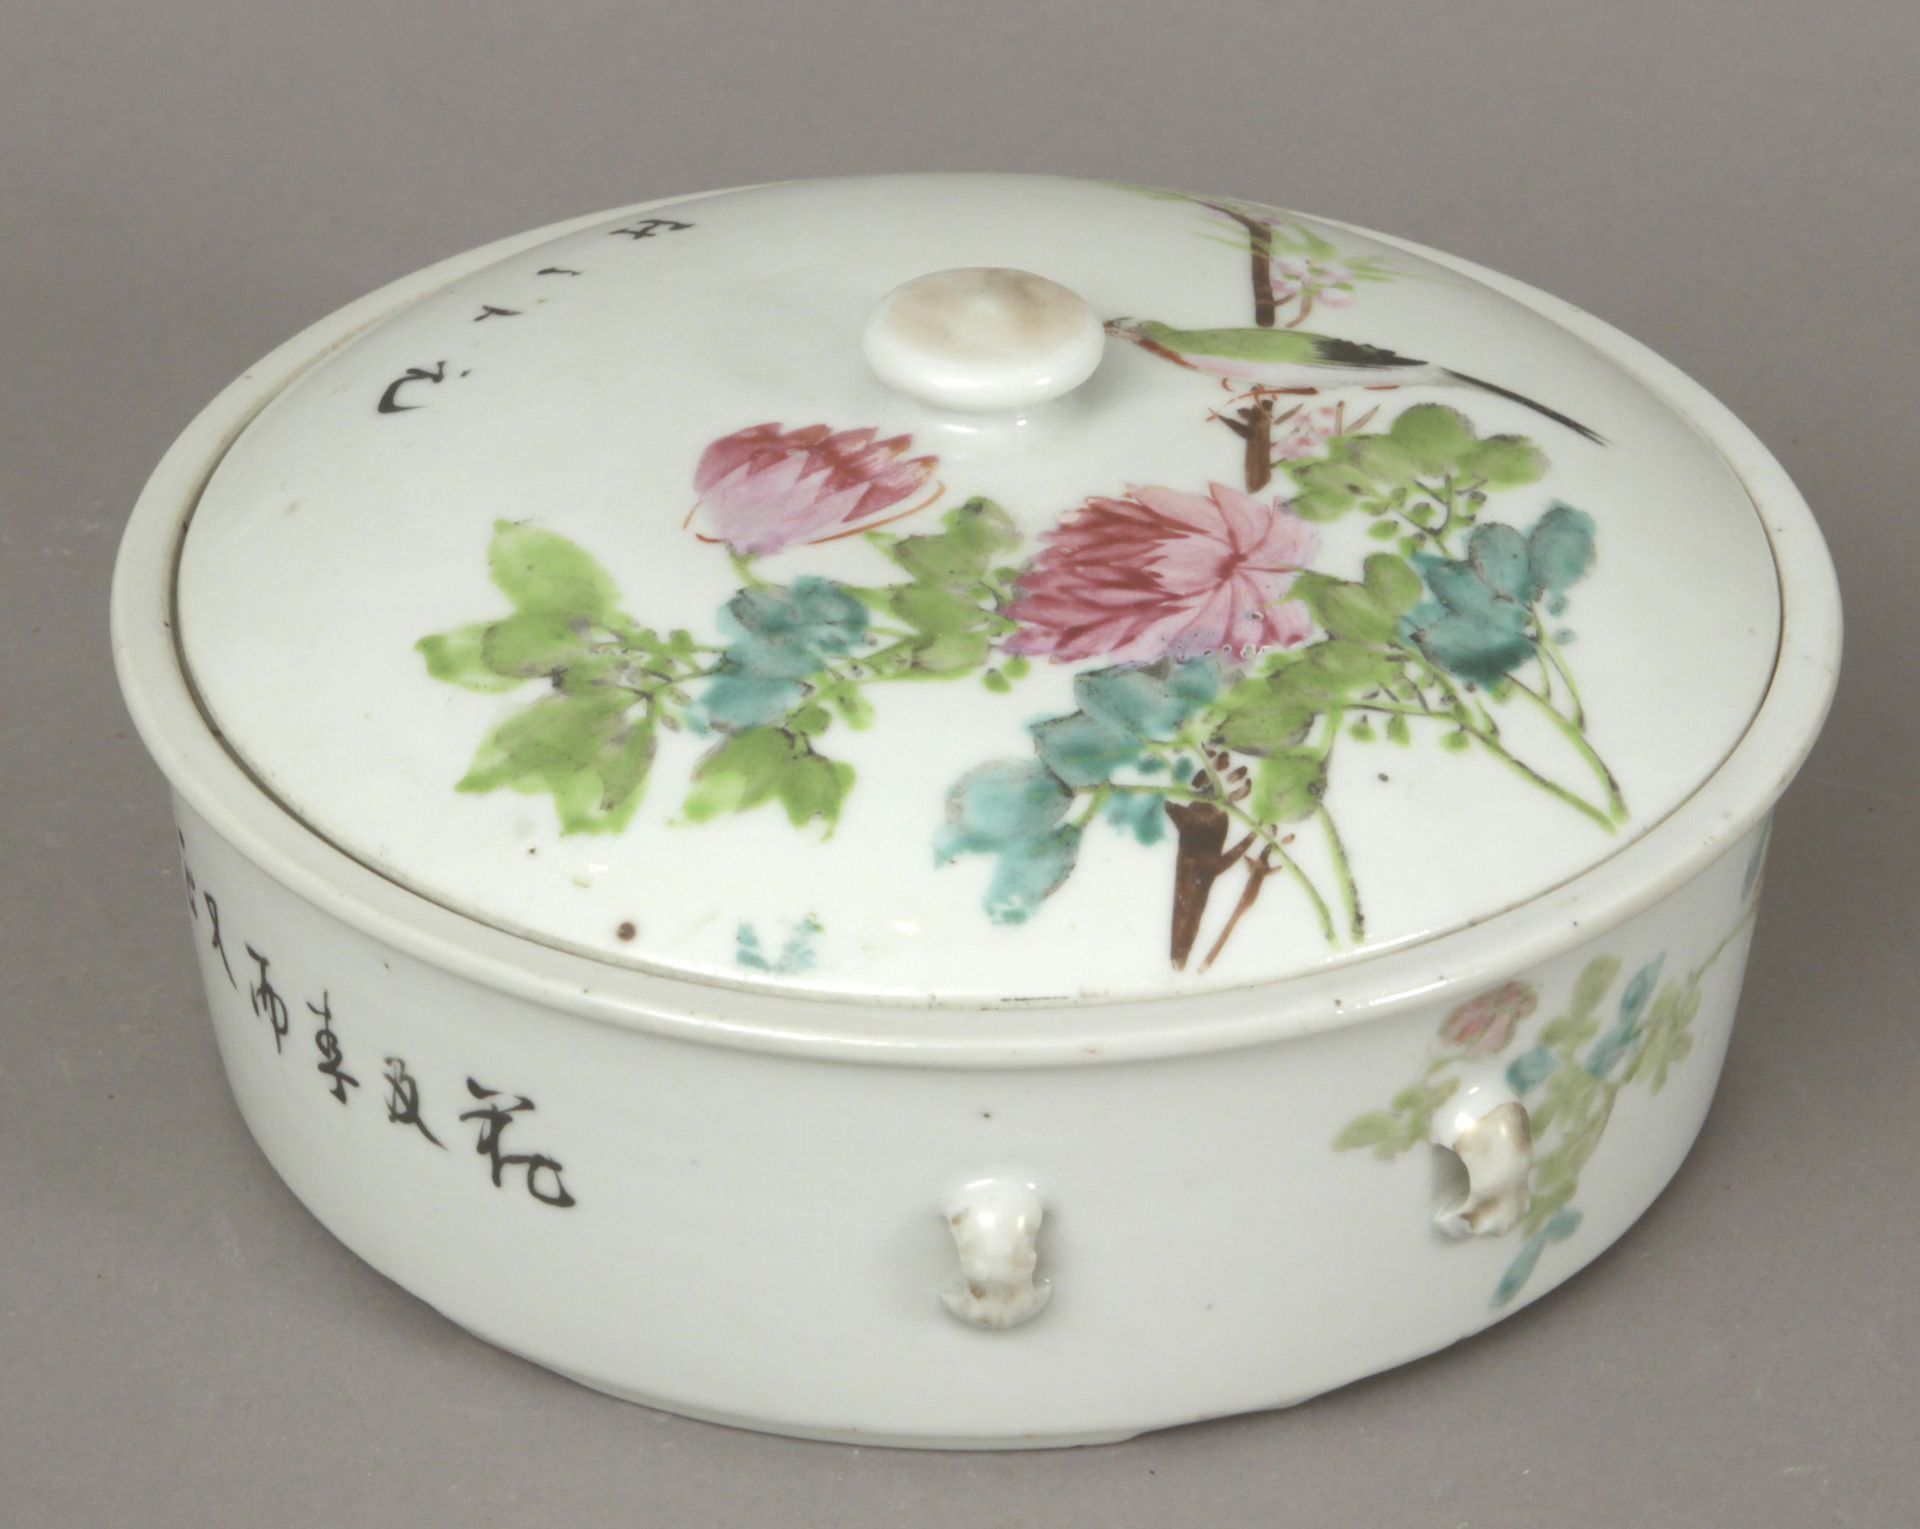 A 20th century Chinese legume container in Famille Rose porcelain